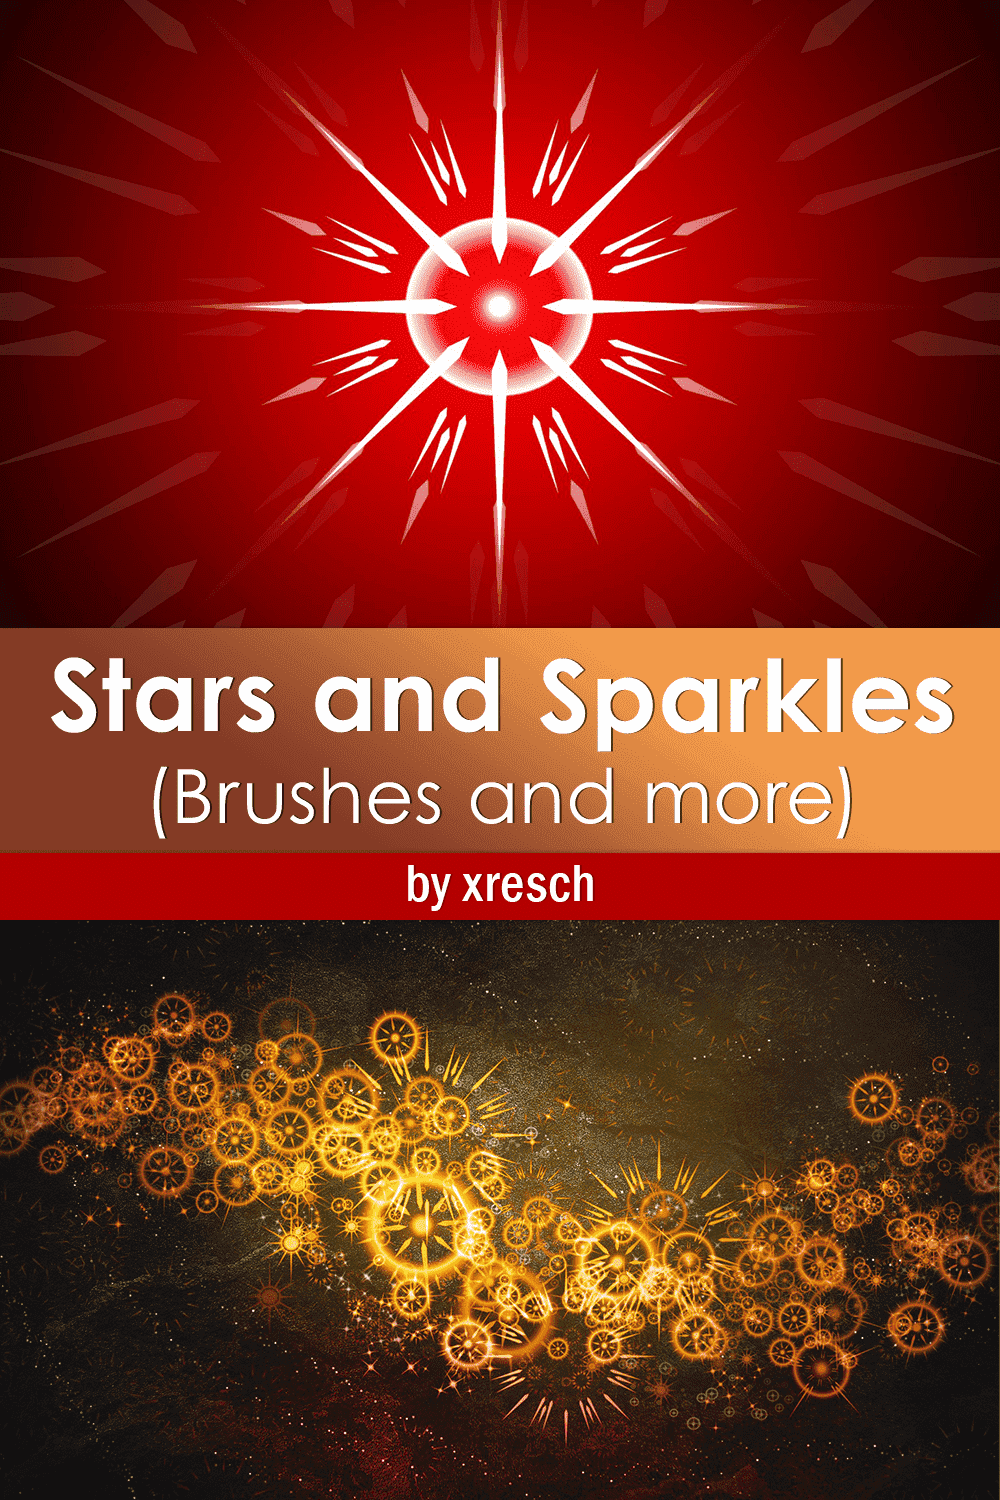 Stars and sparkles brushes and more, picture for pinterest 1000x1500.